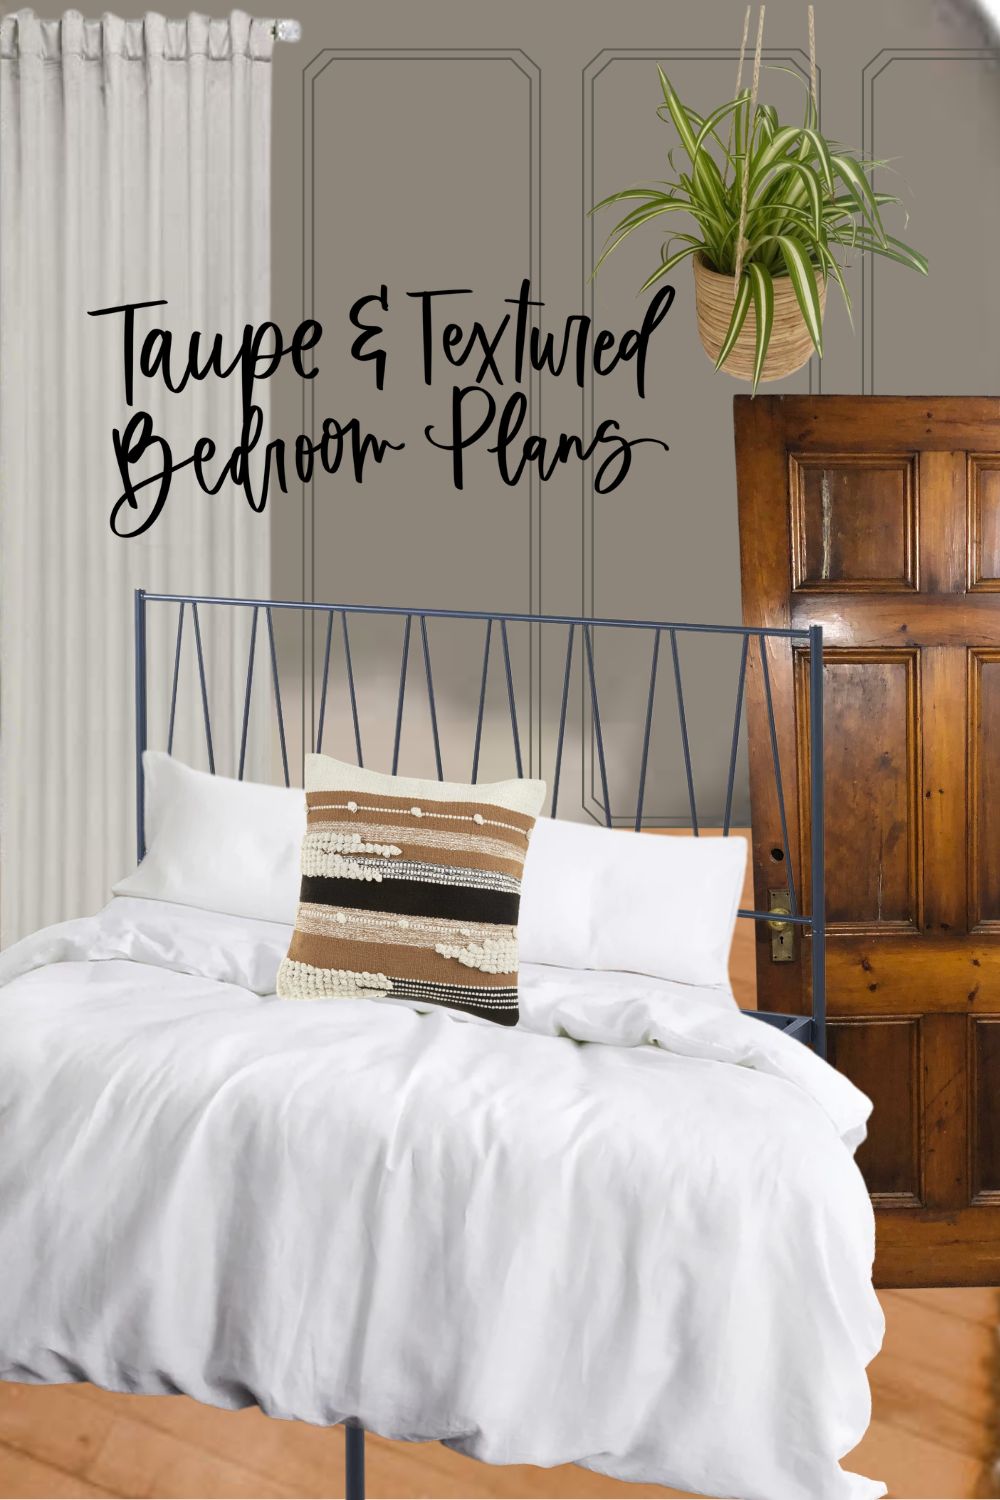 Taupe and Textured Bedroom Plans